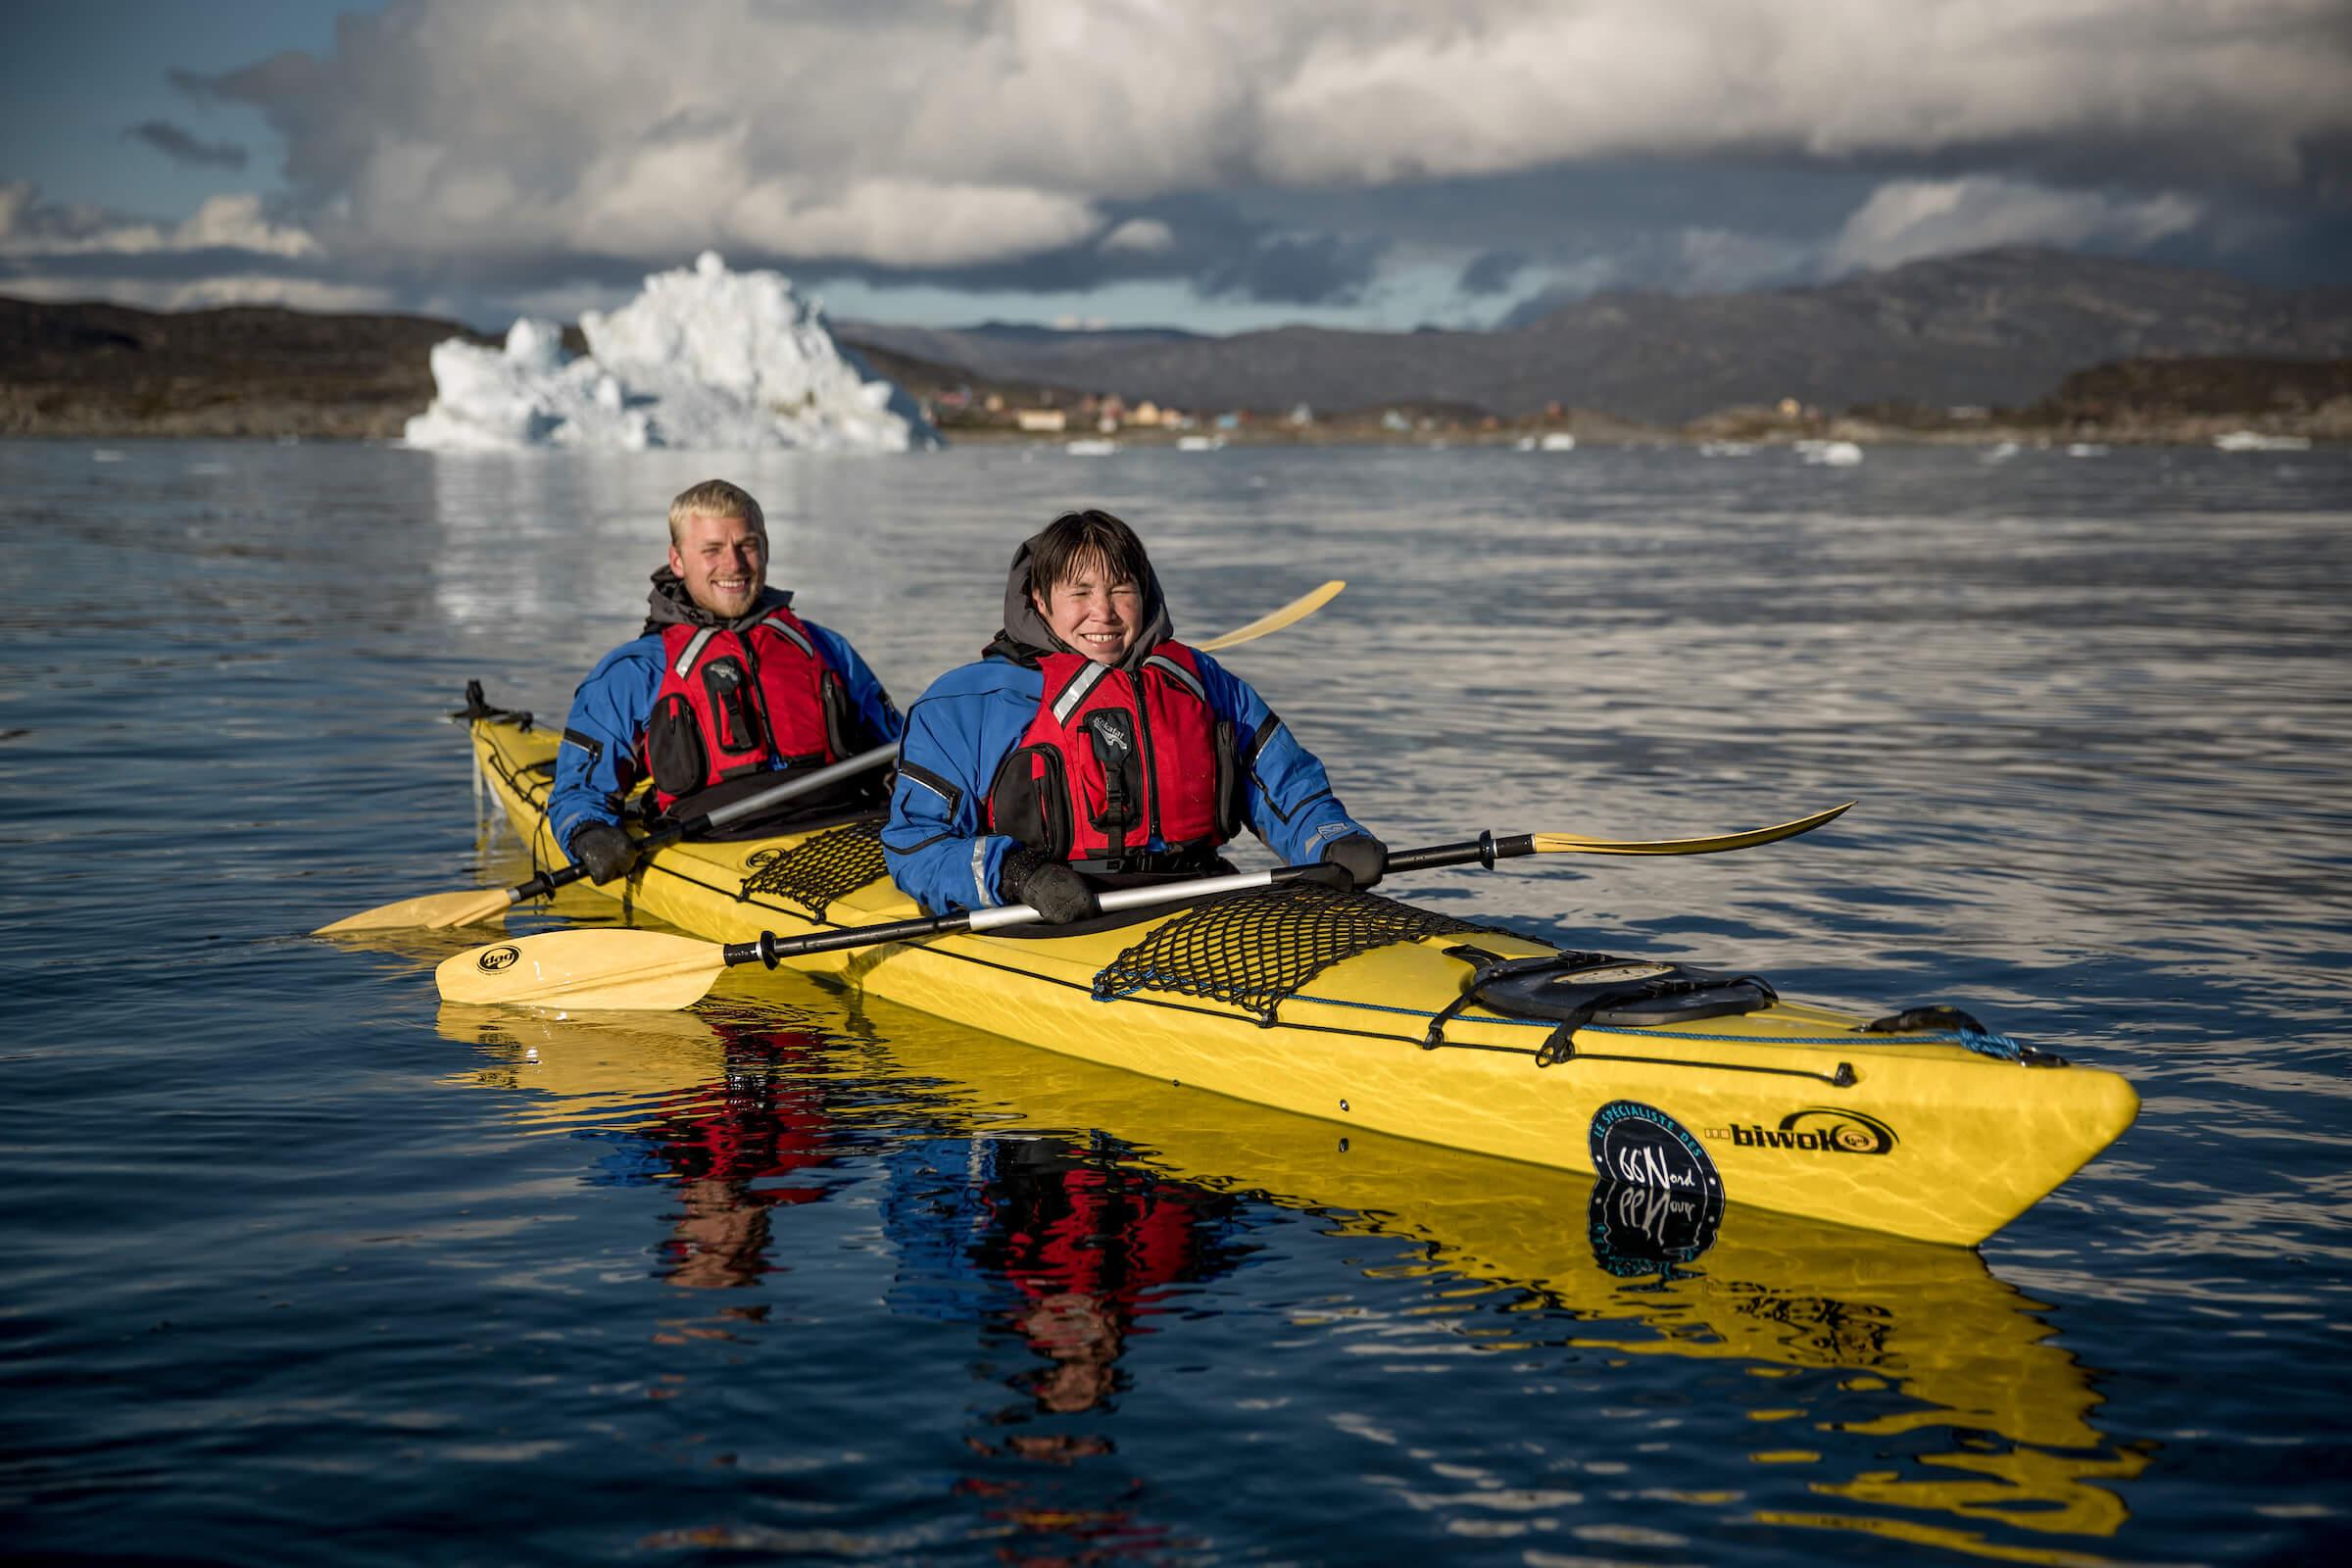 Two happy kayakers from PGI Greenland near Oqaatsut in Greenland. Photo by Mads Pihl.